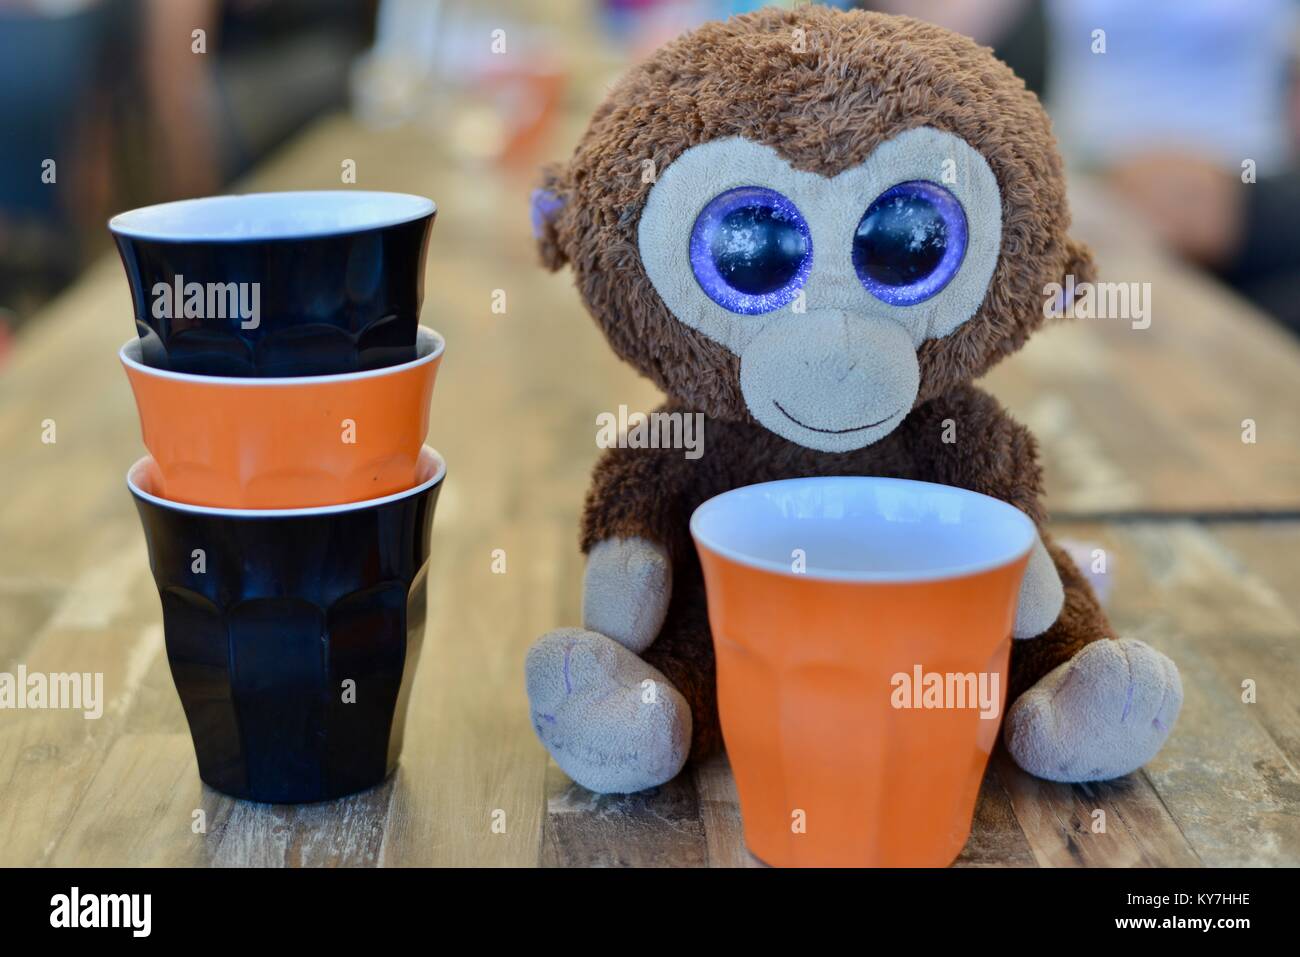 Big eyed toy monkey sitting on a cafe table among an arrangement of   of black and orange plastic cups, Sunshine coast, Queensland, Australia Stock Photo